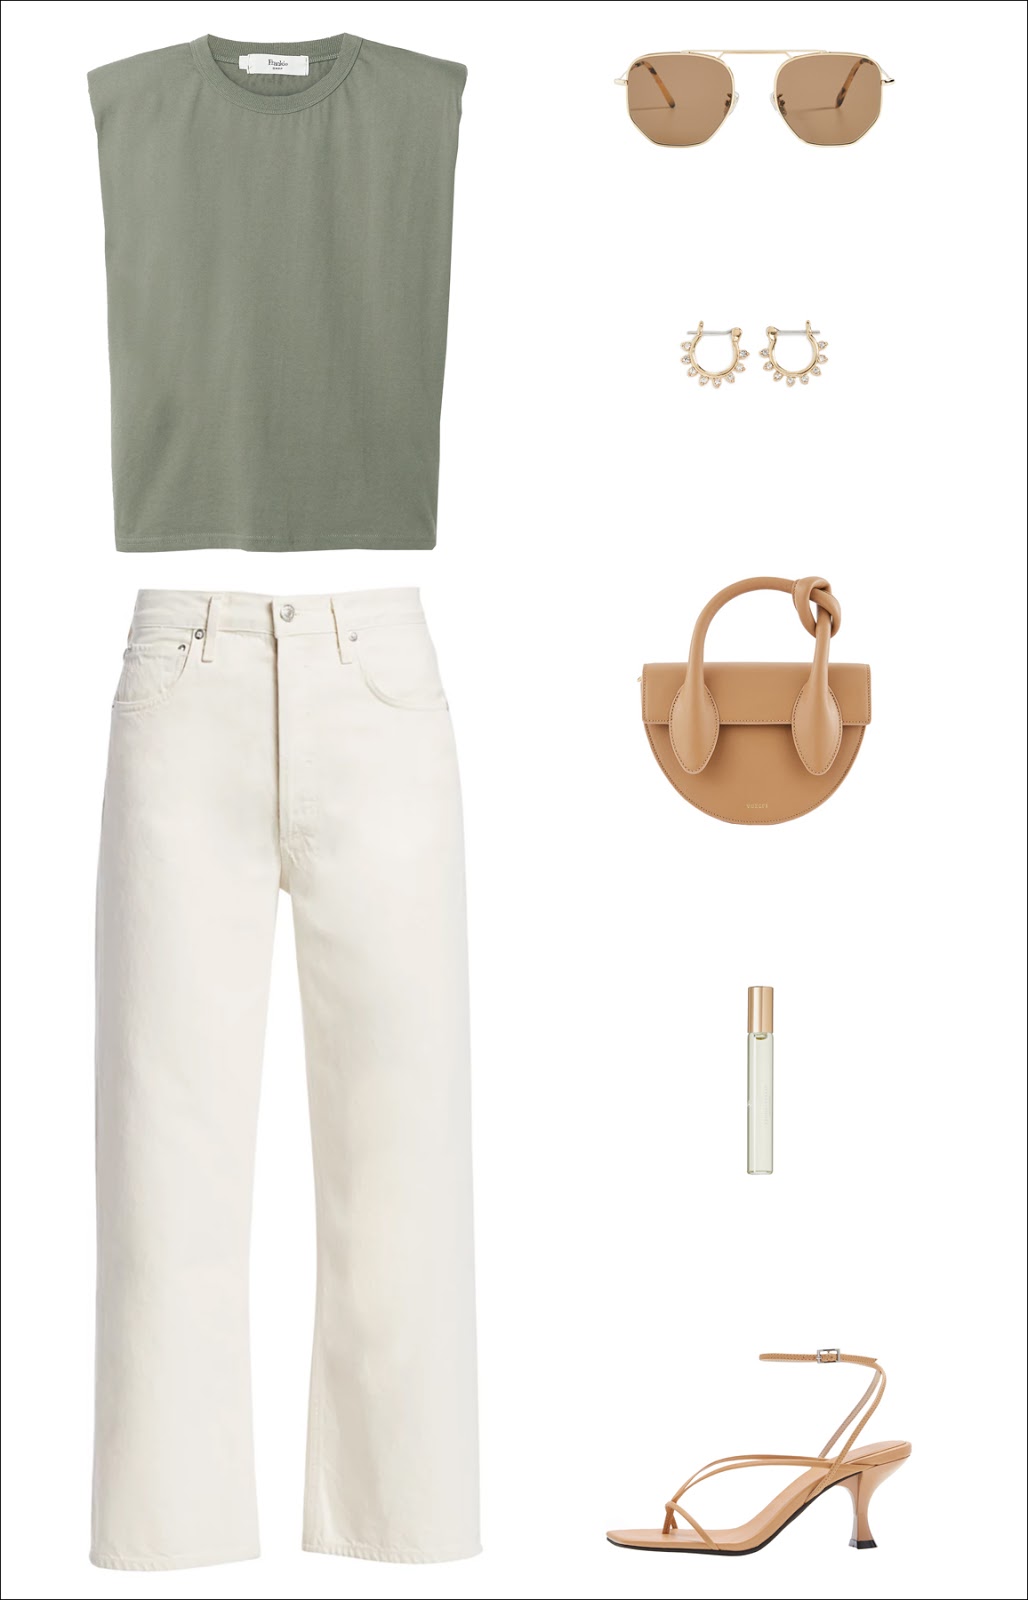 Summer Outfit Idea: The Frankie Shop padded-shoulder muscle tank top, statement sunglasses, cool small hoop earrings, a neutral mini bag, high-waisted white jeans, and neutral strappy sandals